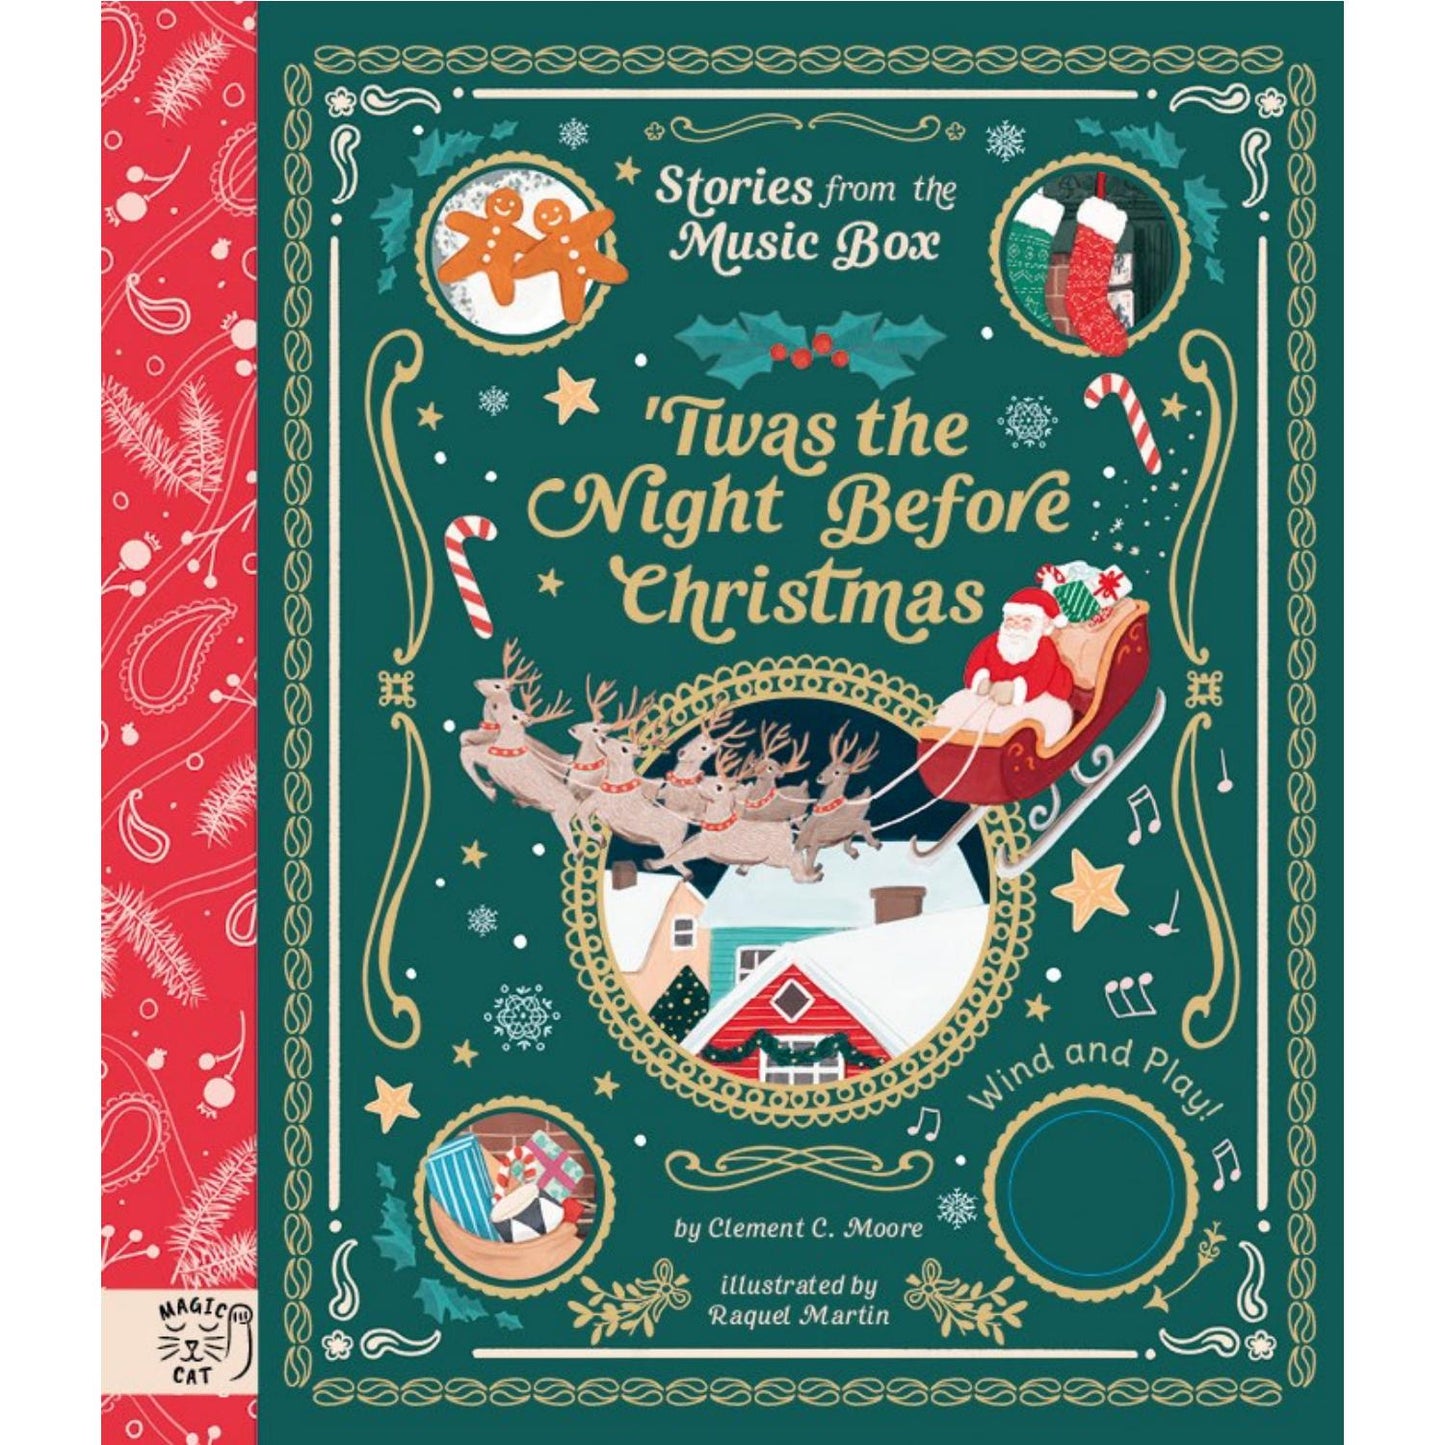 Twas the Night Before Christmas: Wind and Play! | Hardcover | Children’s Book on Christmas